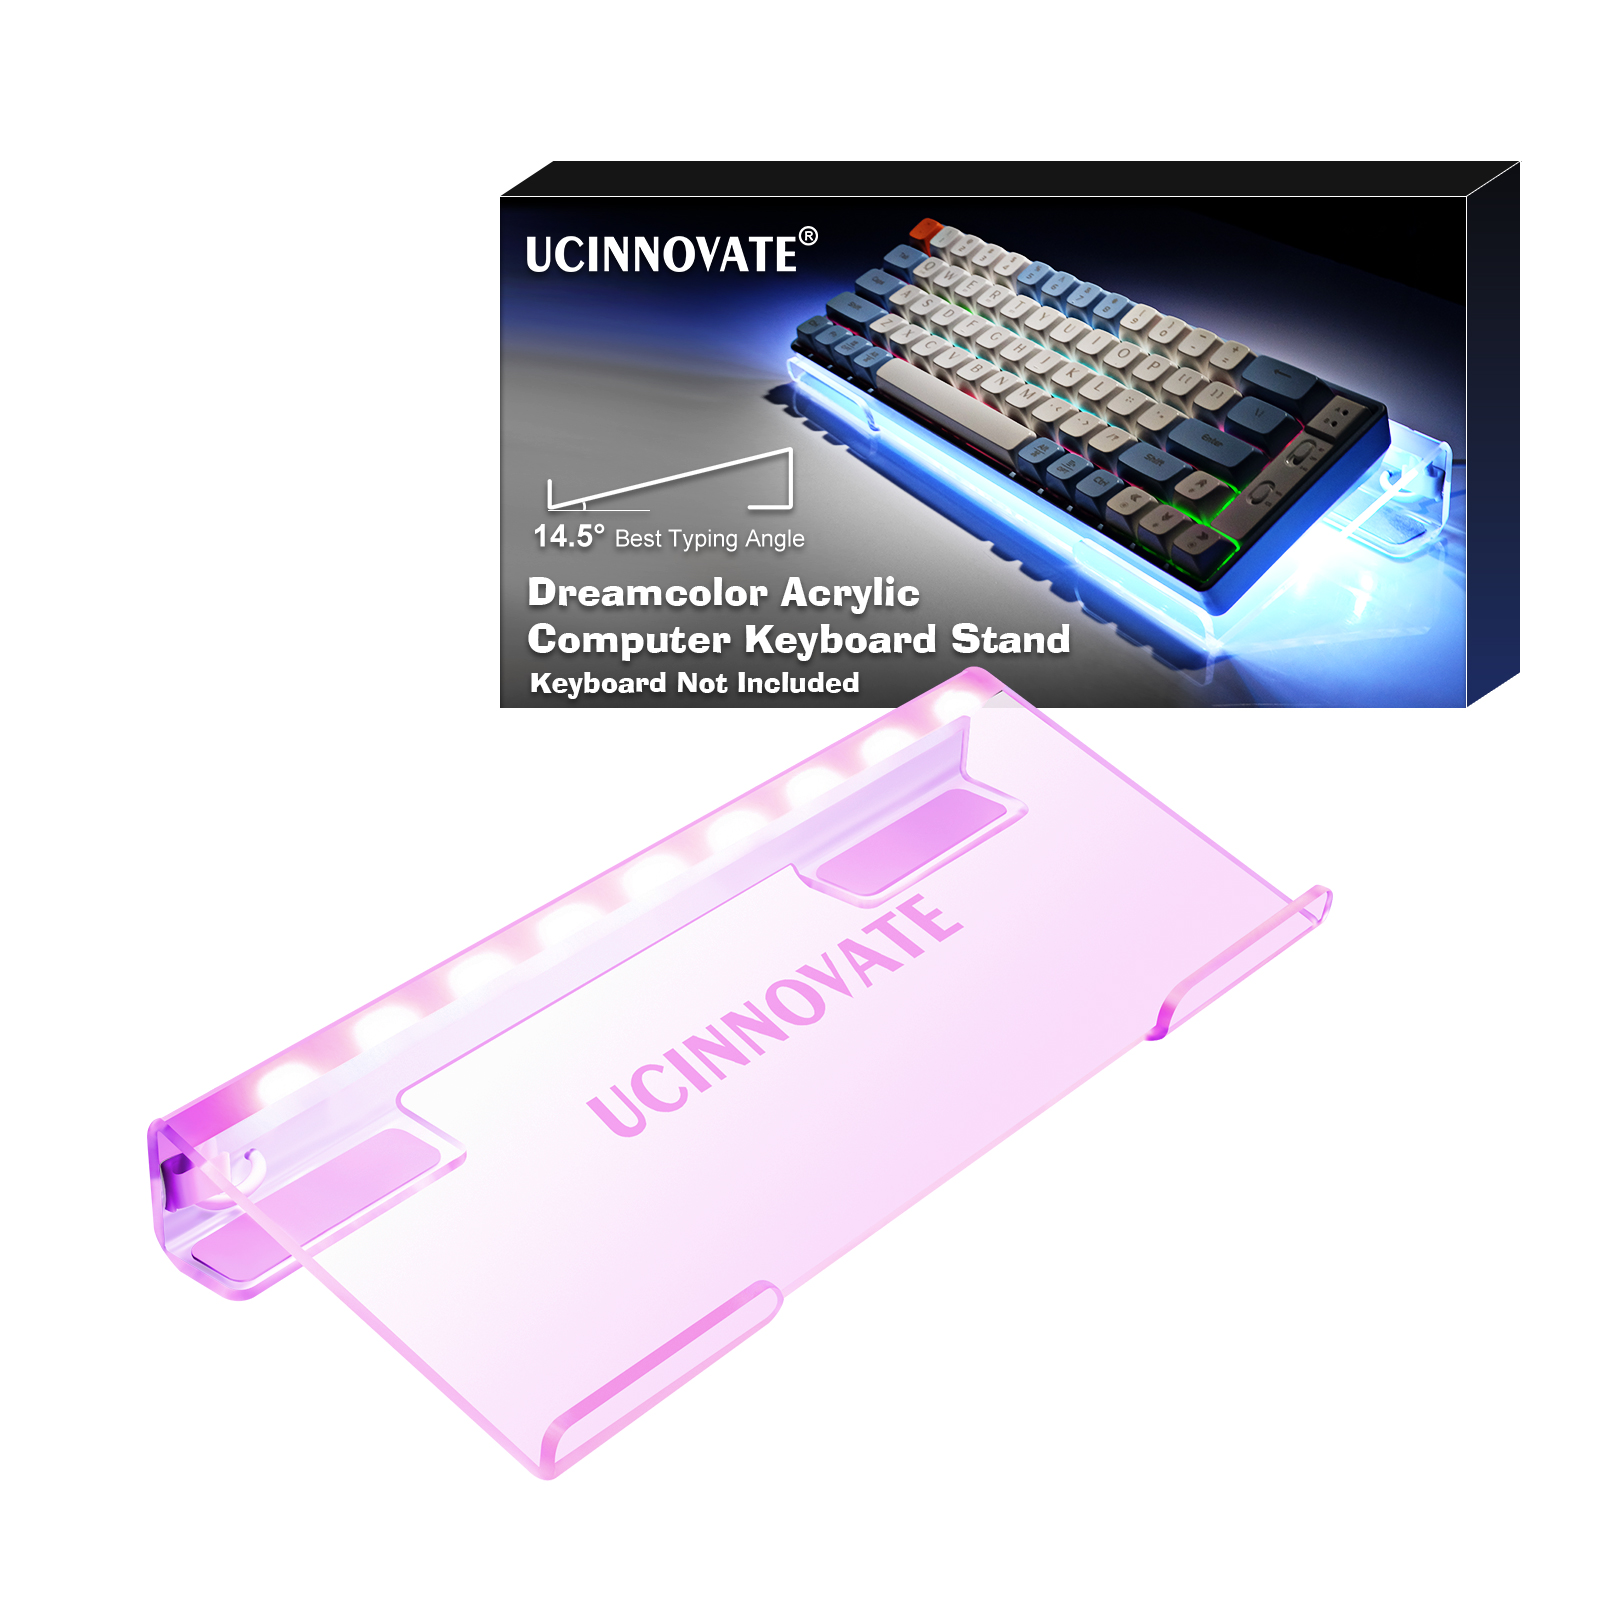 UCINNOVATE RGB Acrylic Computer Keyboard Stand, Mini LED Backlit Keyboard Stand Tray, 60% Gaming Keyboard USB Interface Titled Keyboard Stand for Easy Ergonomic Typing and Working Office Desk, Home